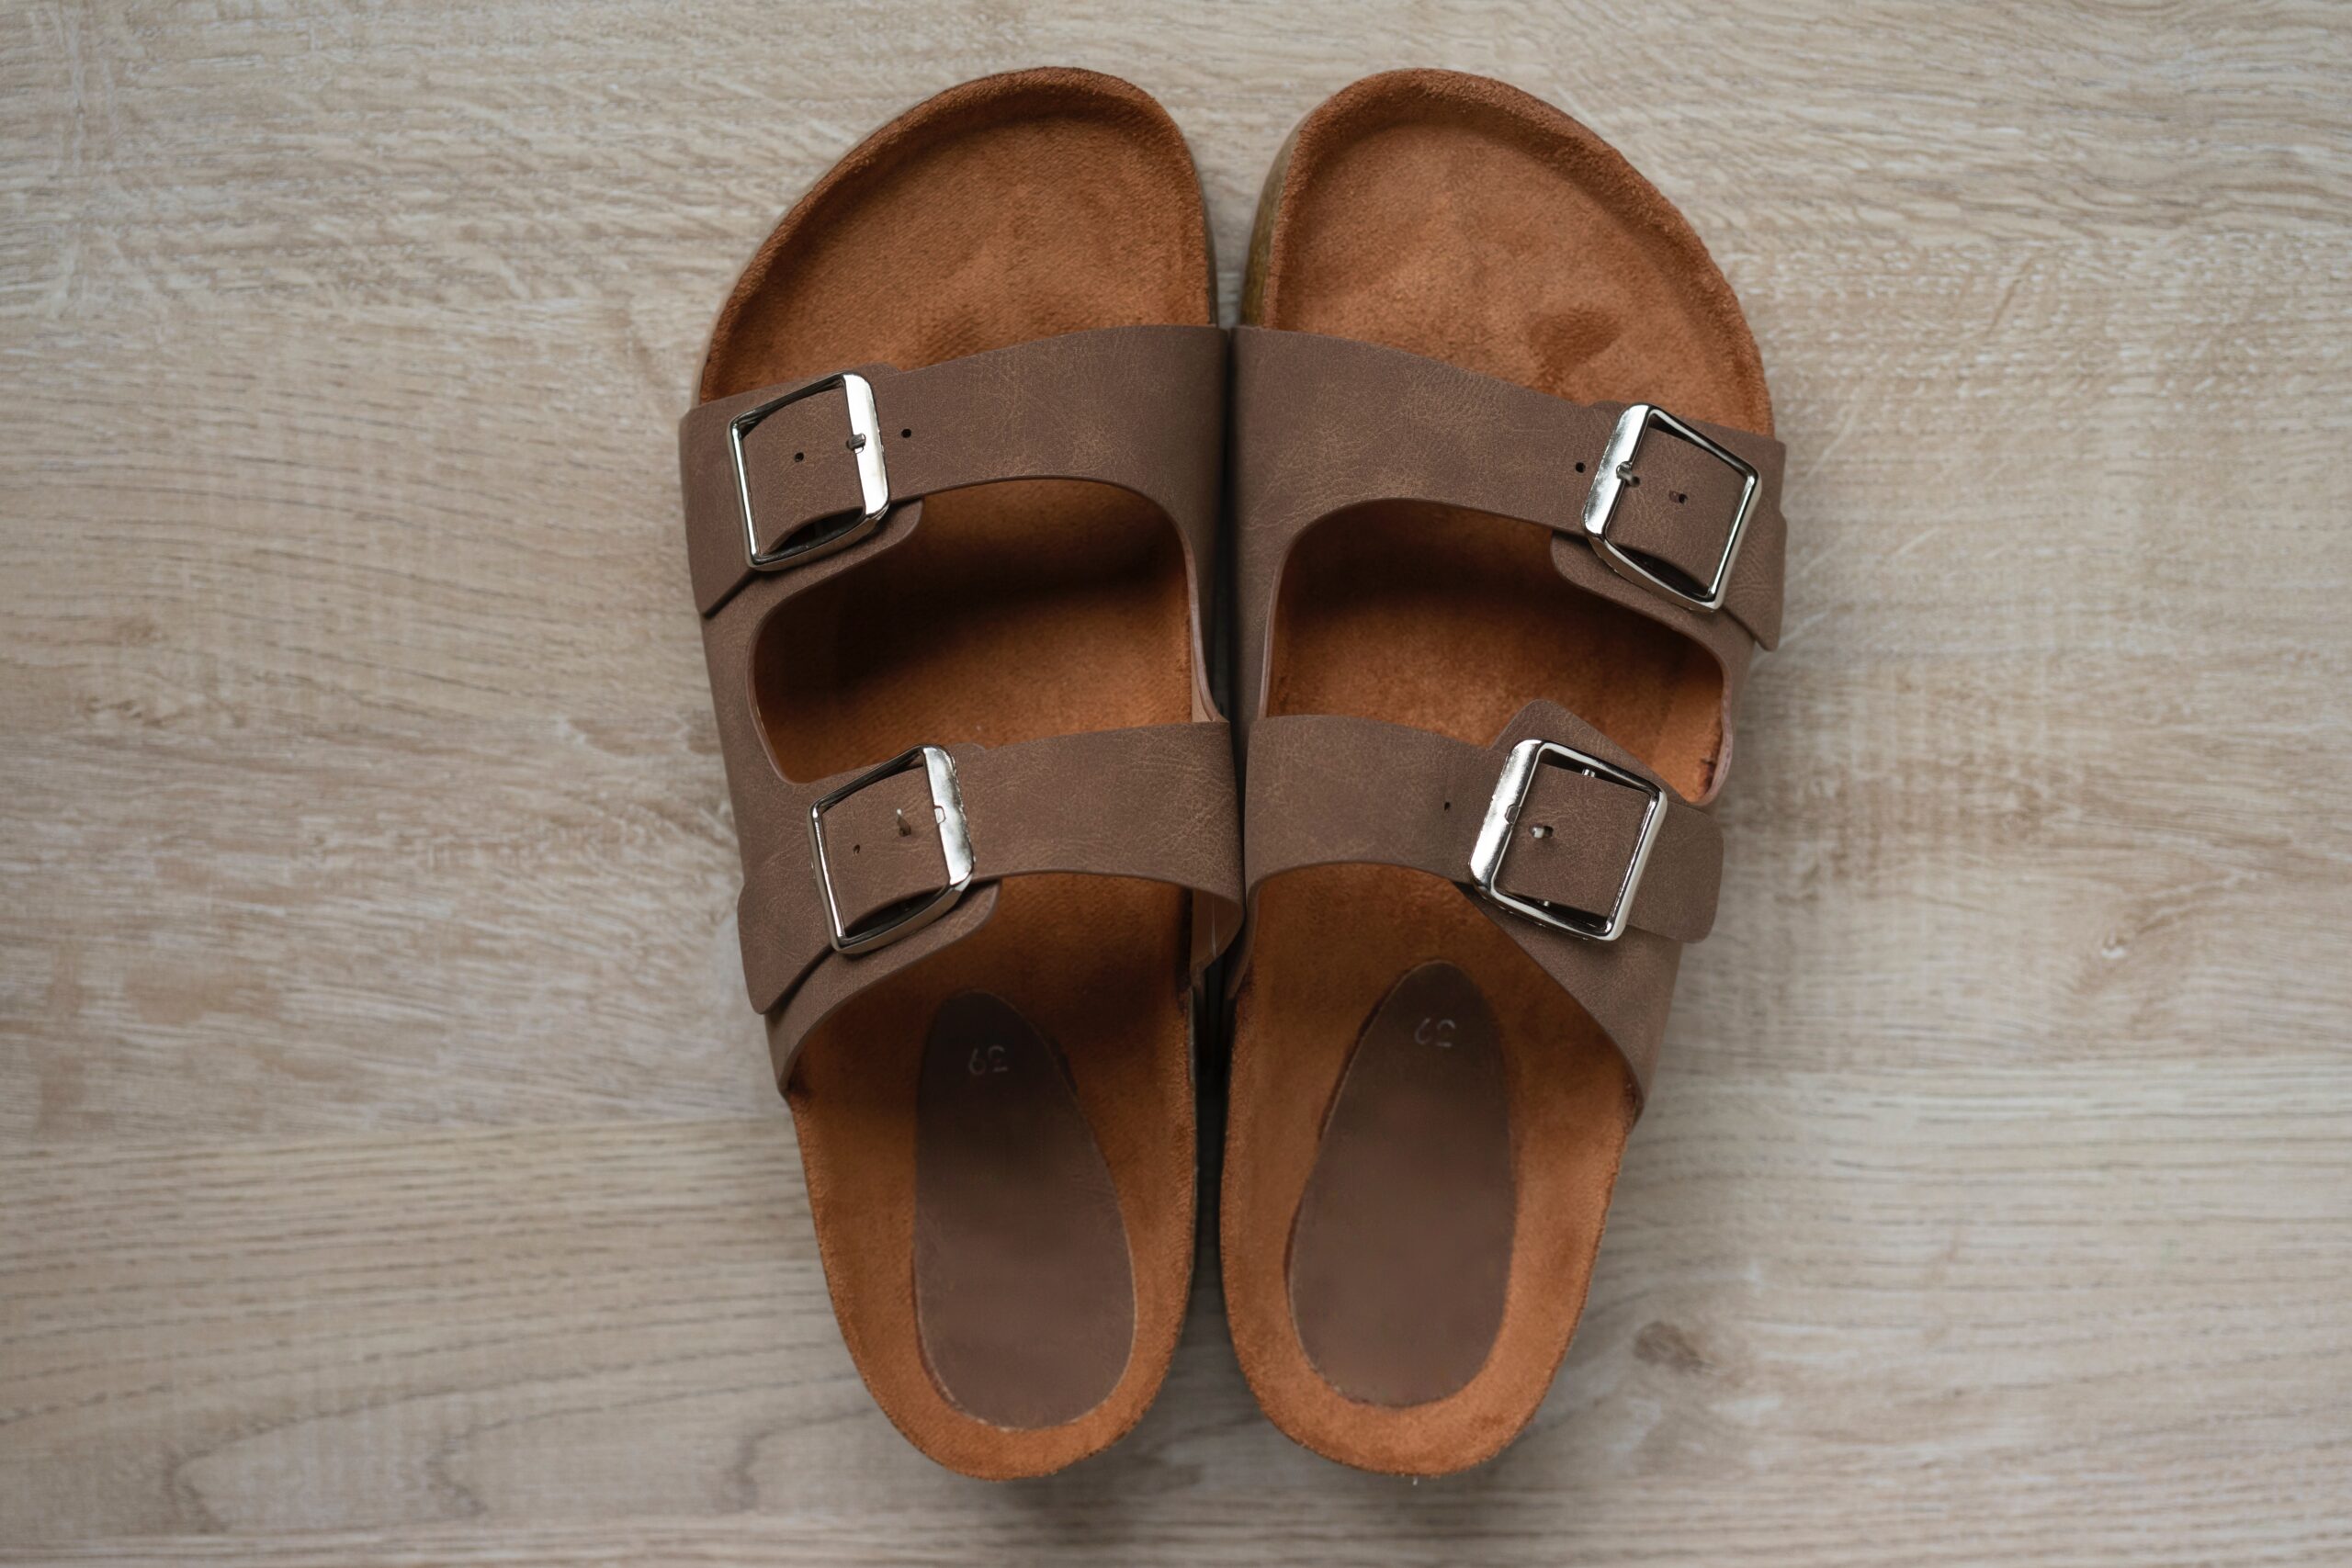 how to clean sandals